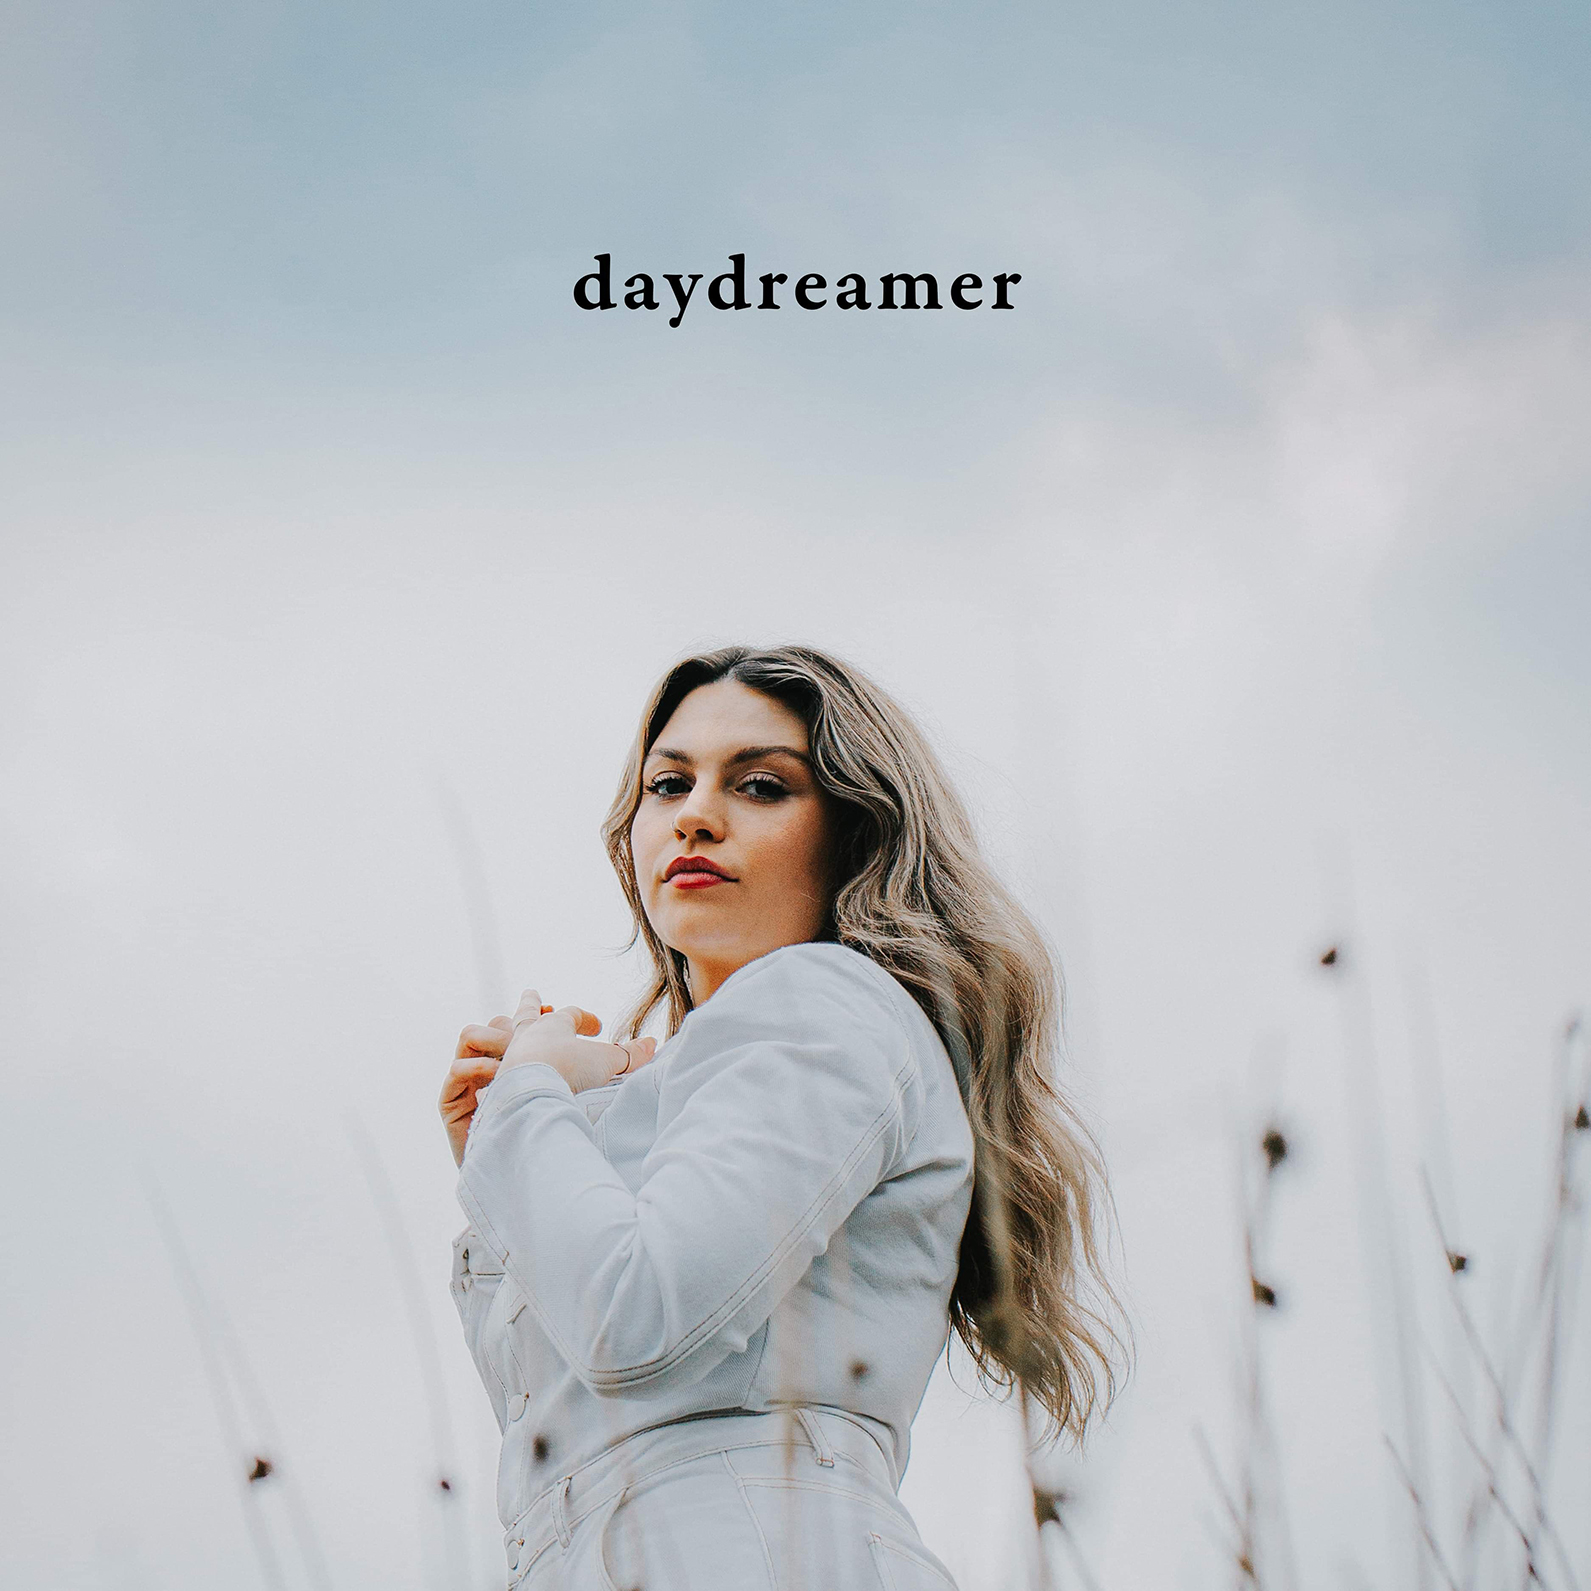 REEVAH releases her brand new single ‘daydreamer’ - Listen Now! 